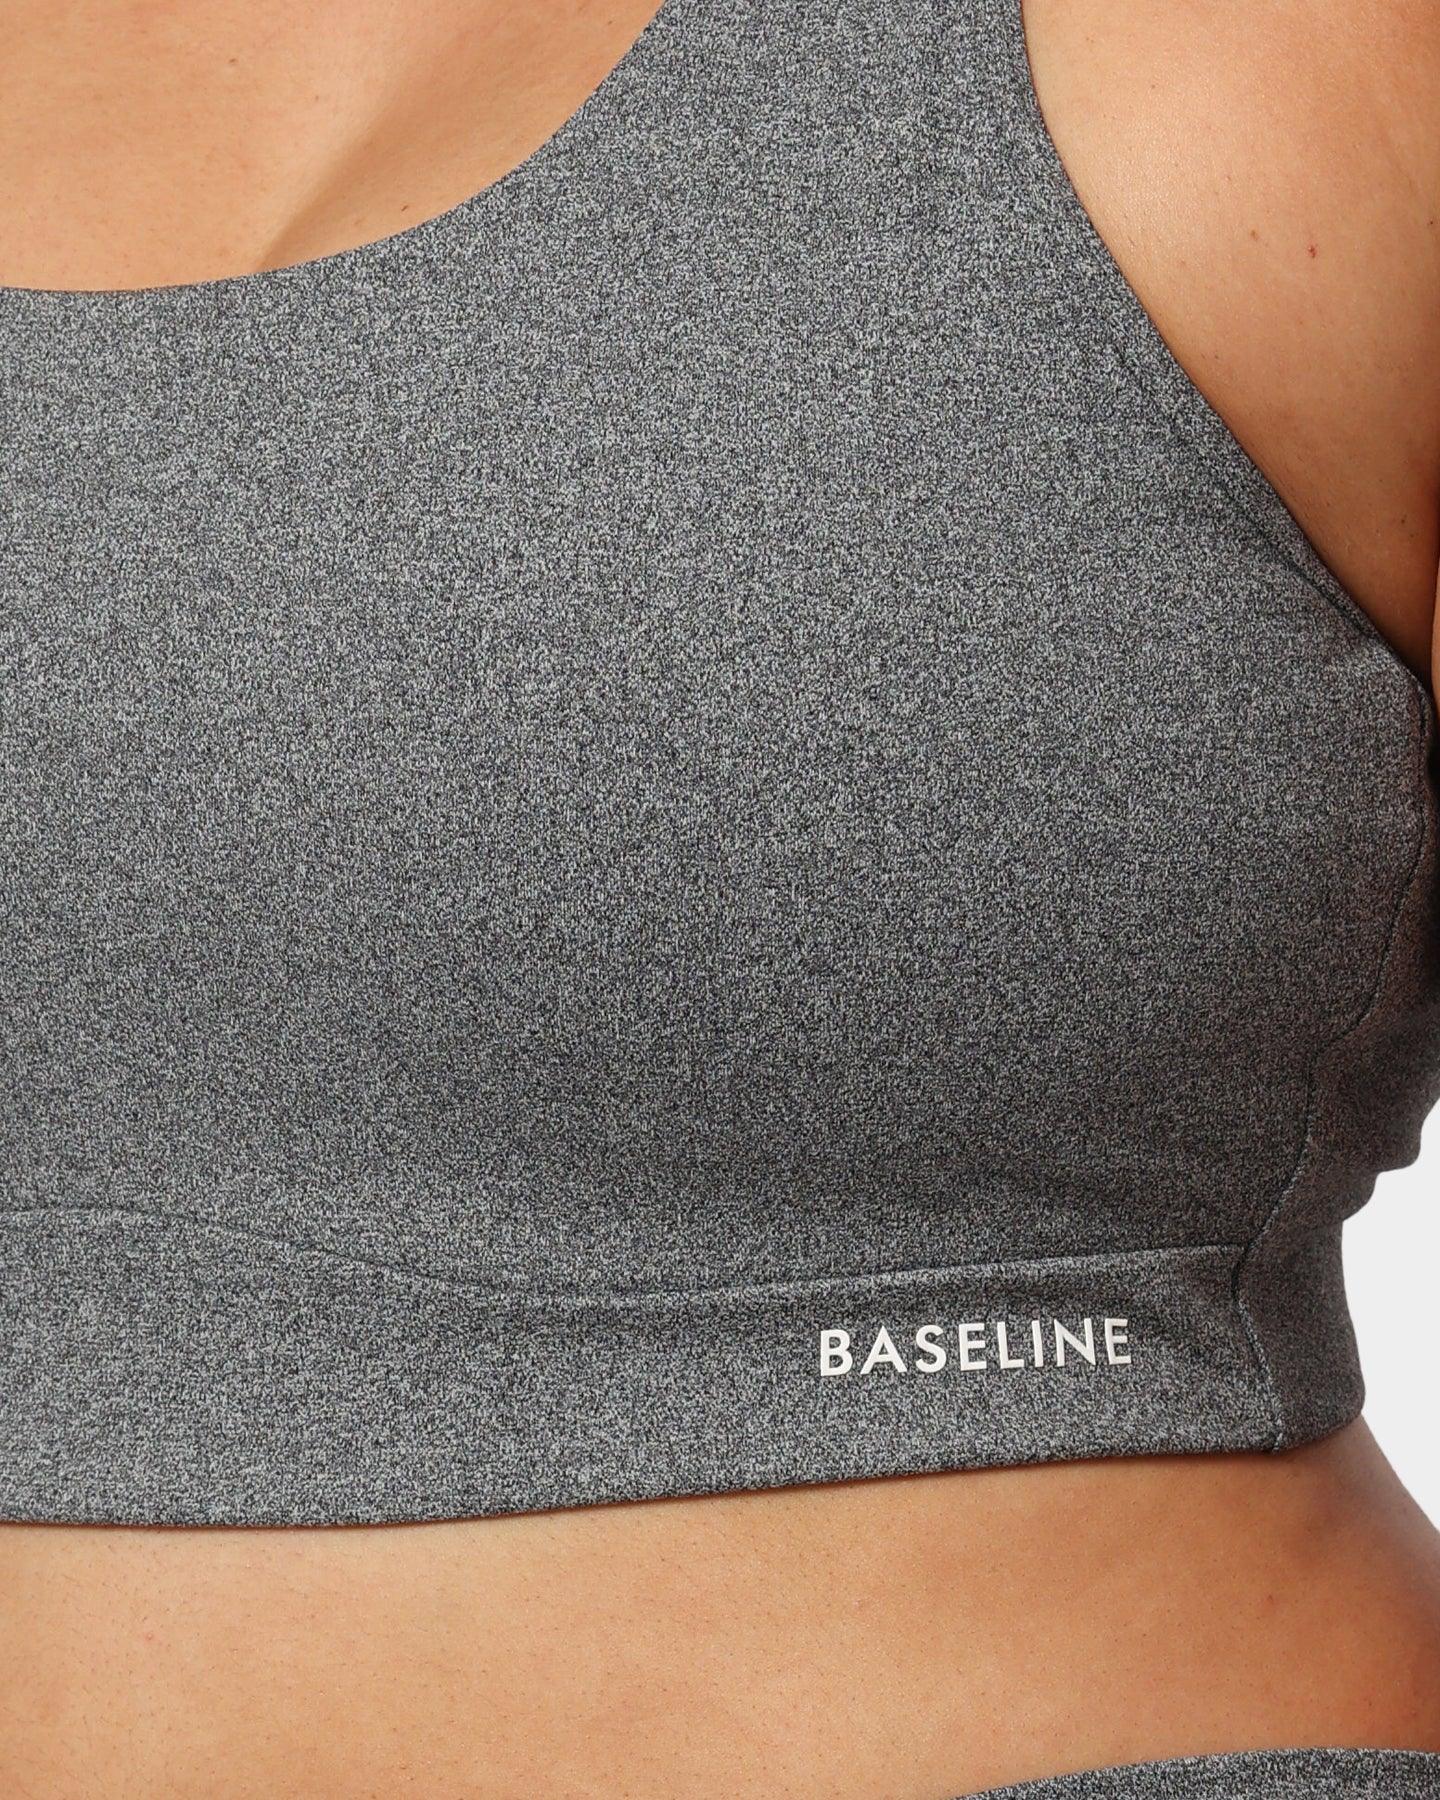 Replying to @user6135870136269 my fav sports bra of all time